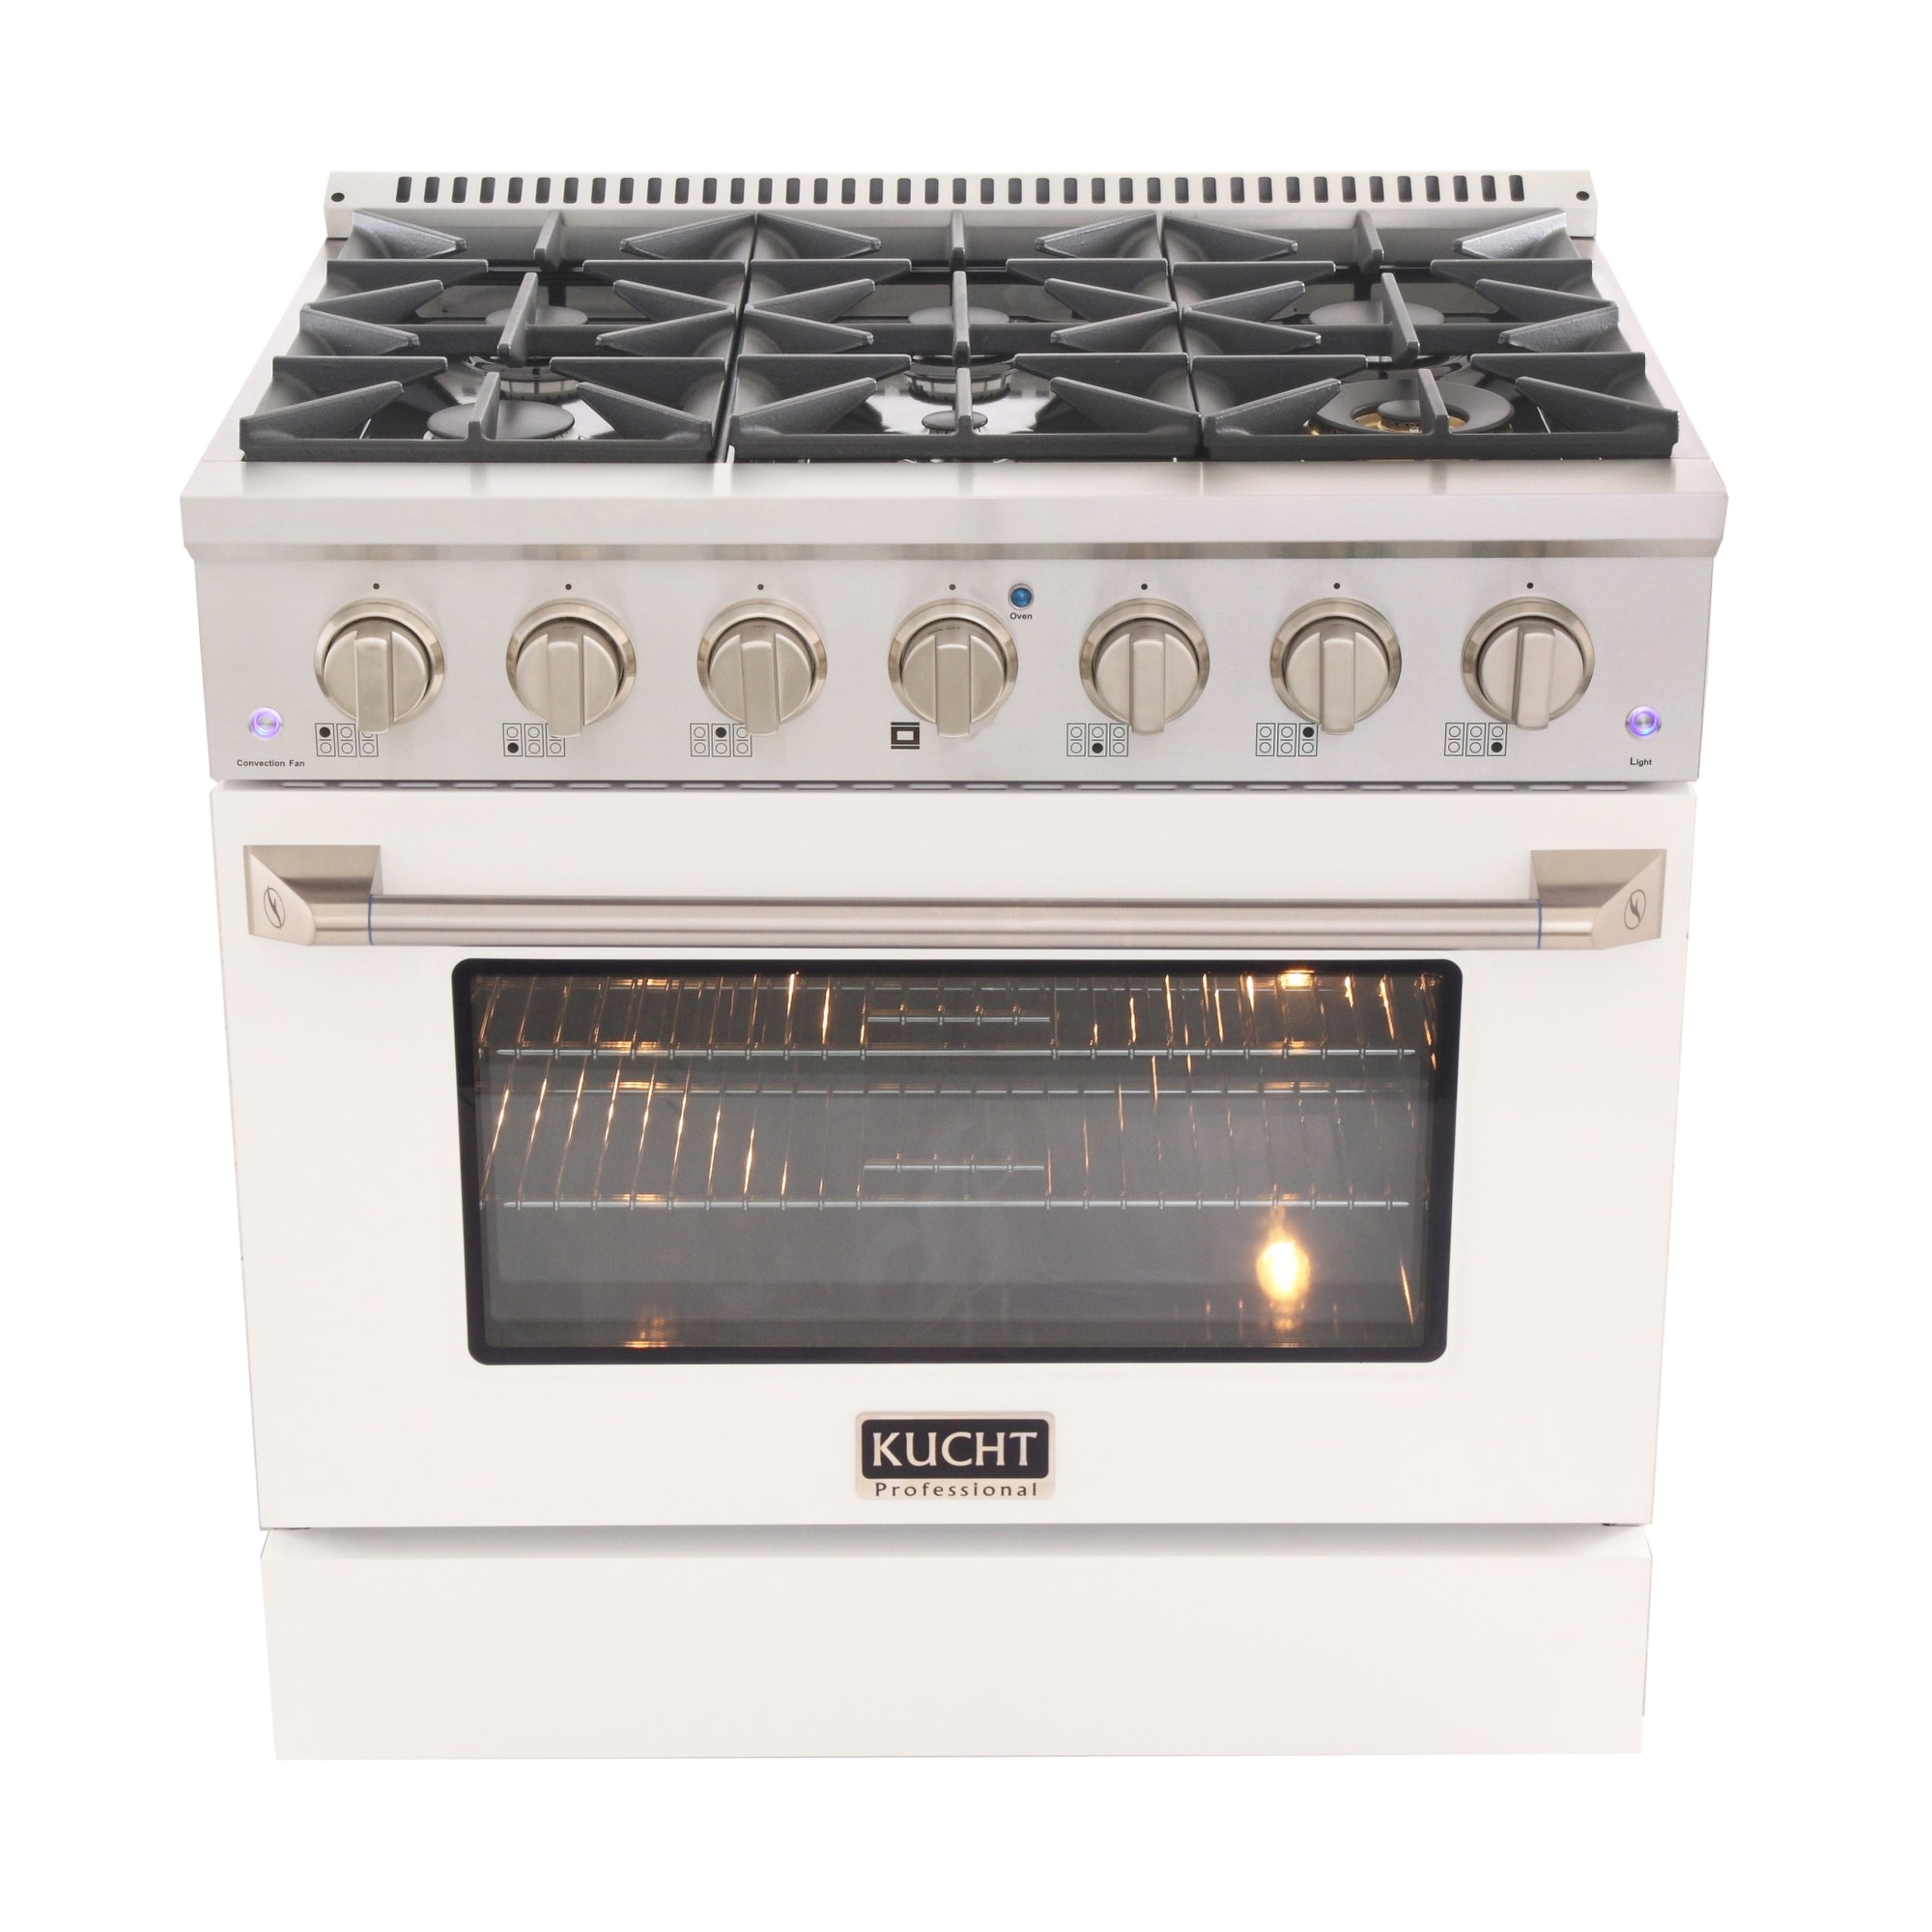 KUCHT 36 in. 5.2 cu. ft. Natural Gas Range with Sealed Burners and Convection Oven with optional color door.